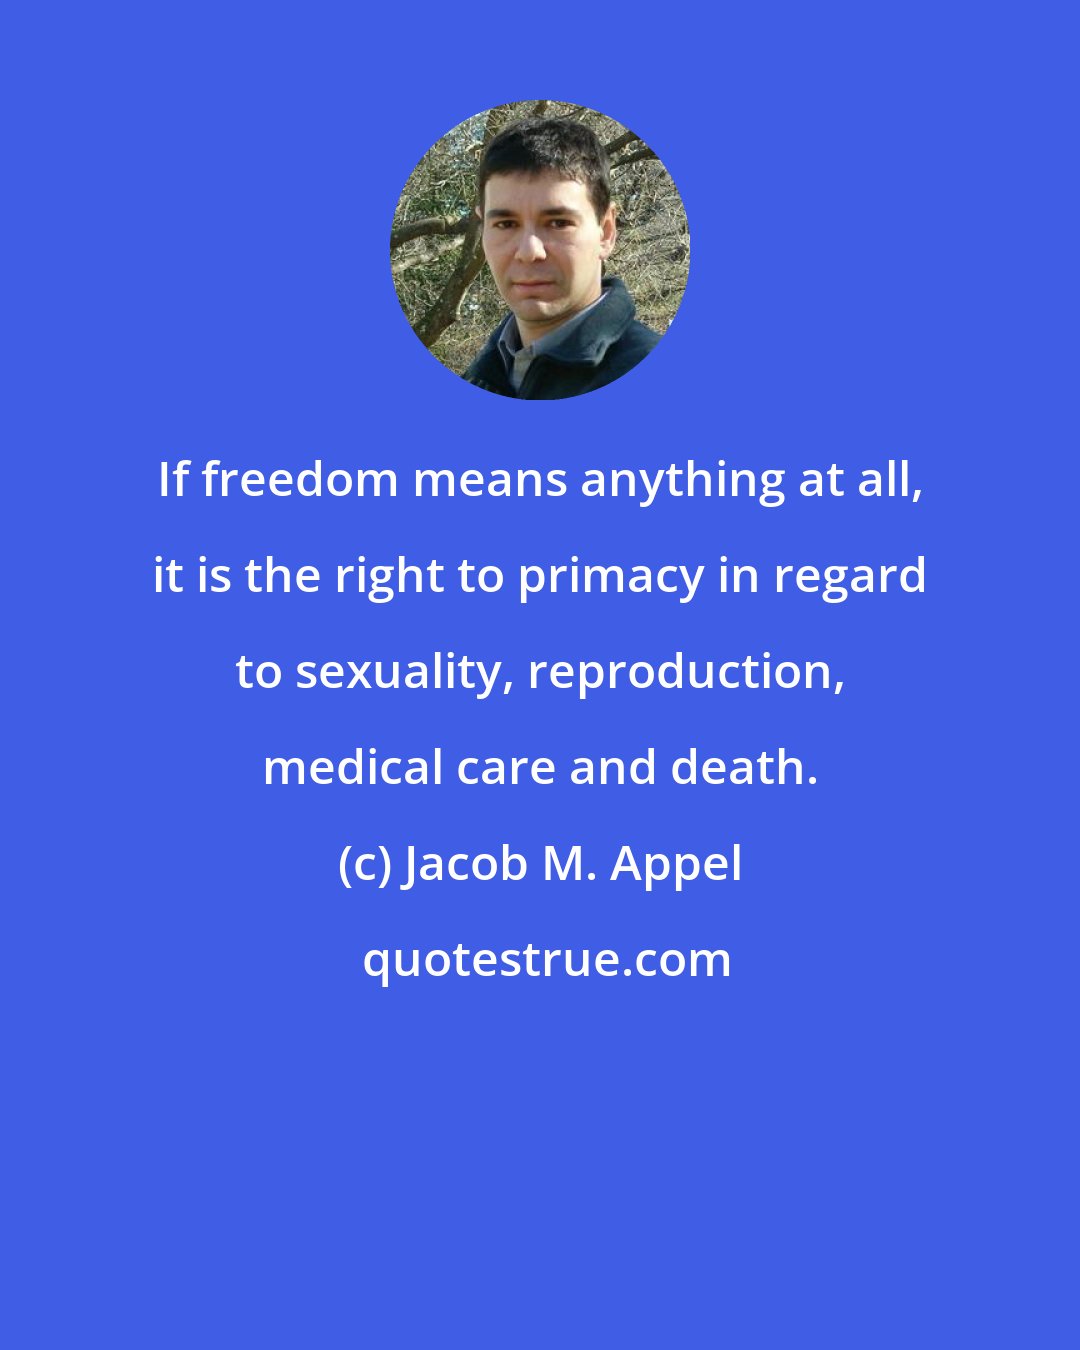 Jacob M. Appel: If freedom means anything at all, it is the right to primacy in regard to sexuality, reproduction, medical care and death.